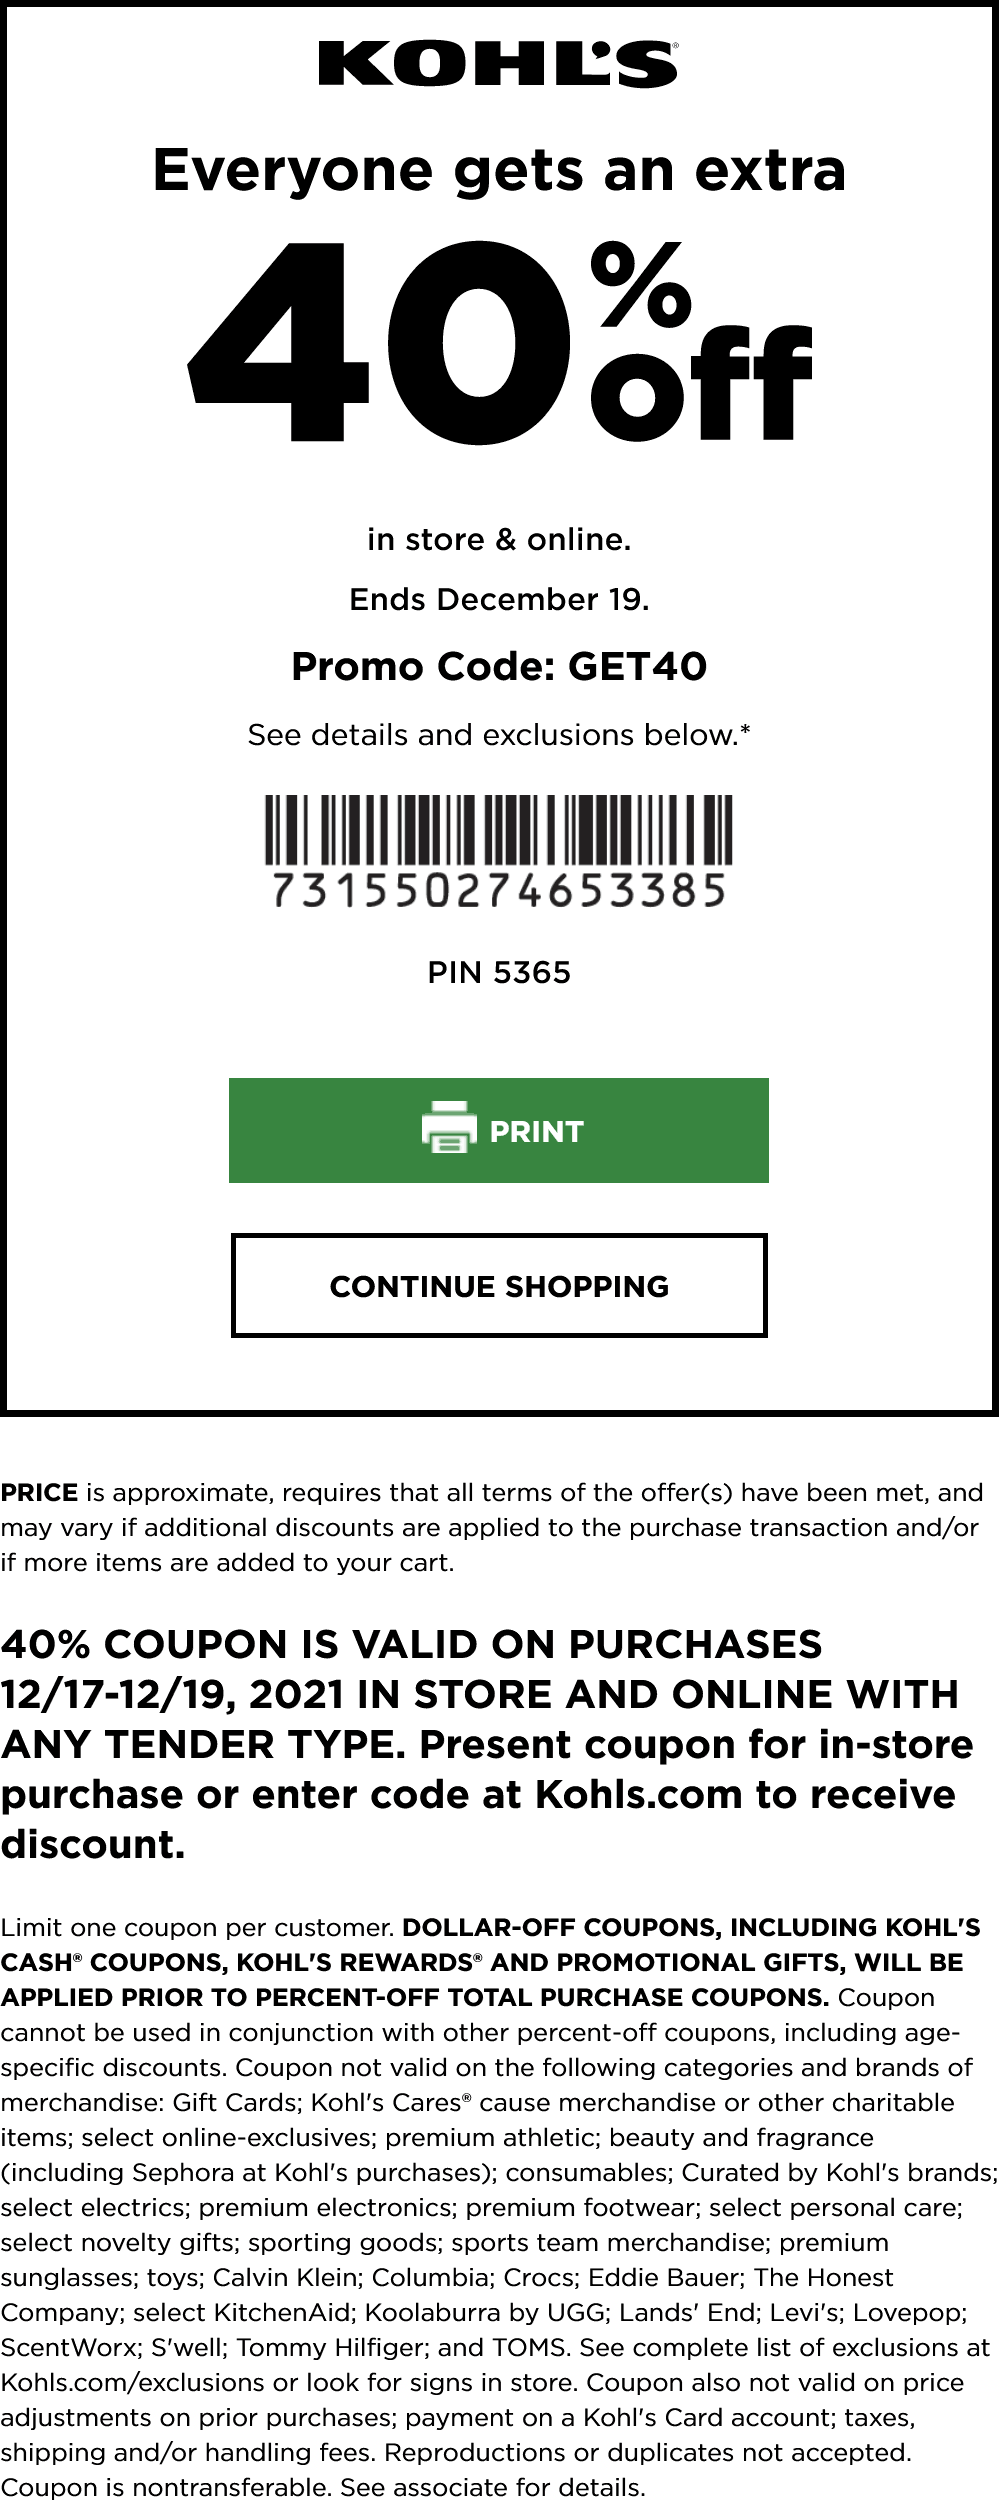 Extra 40 off everything today at Kohls, or online via promo code GET40